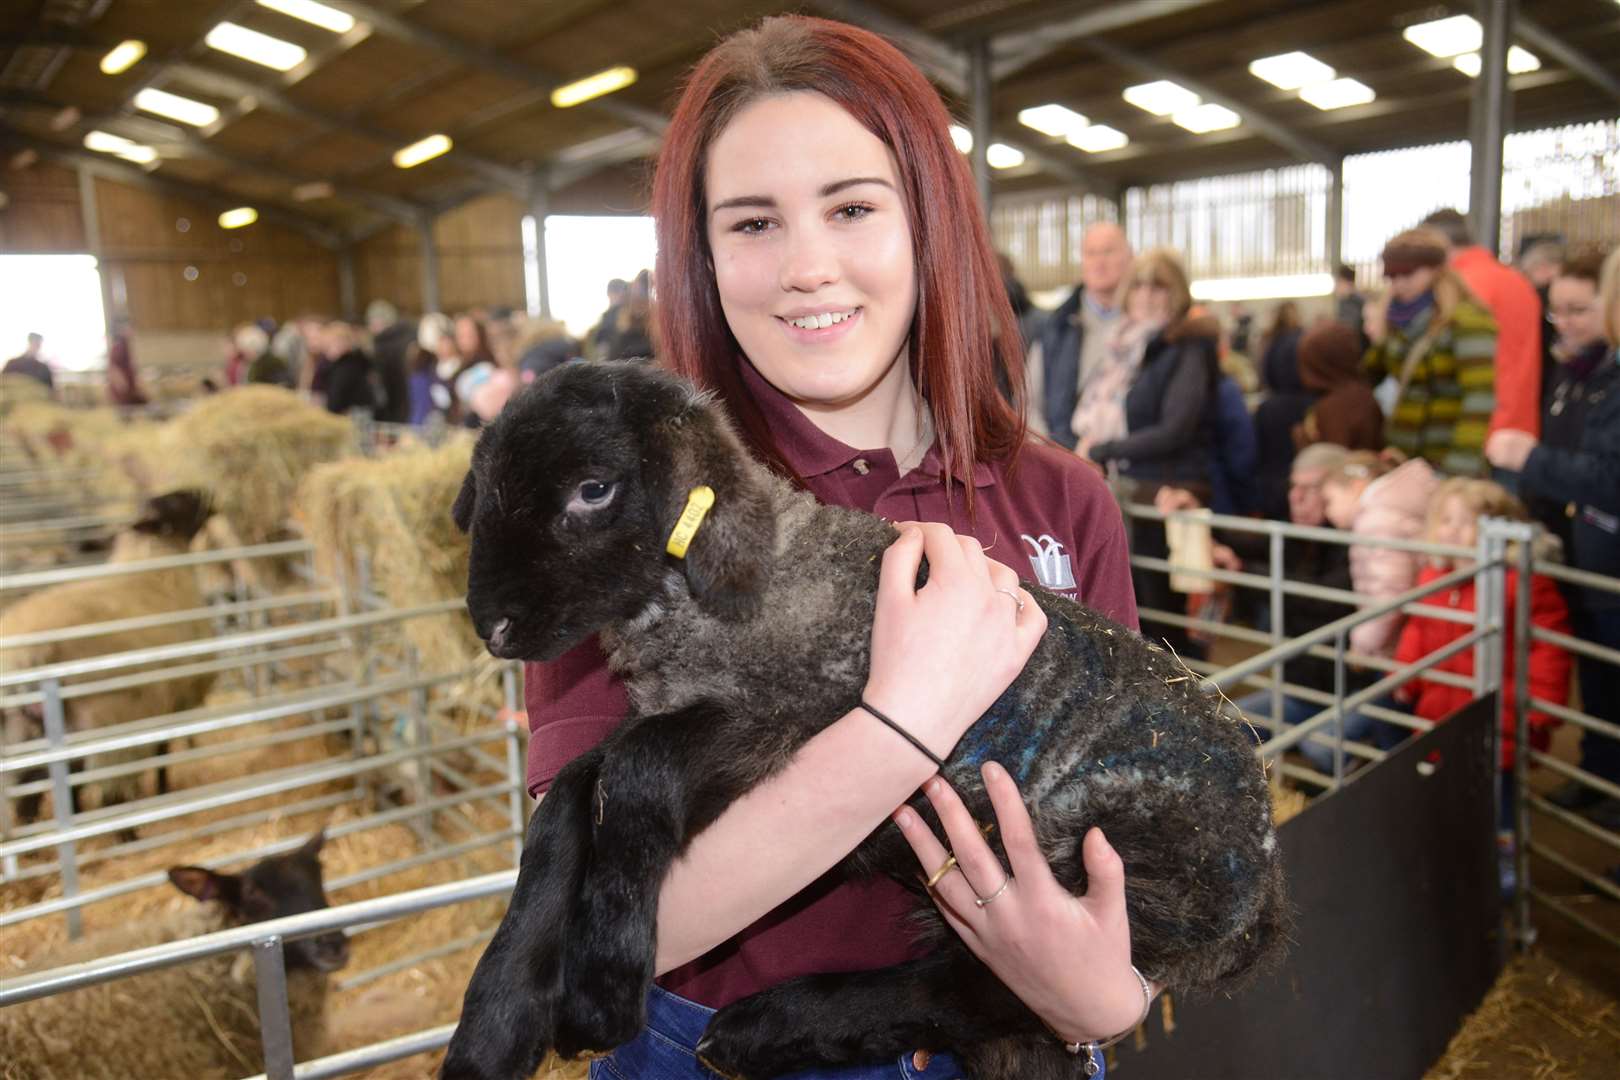 Hadlow Collge's lambing weekend is one of the biggest events in its calendar